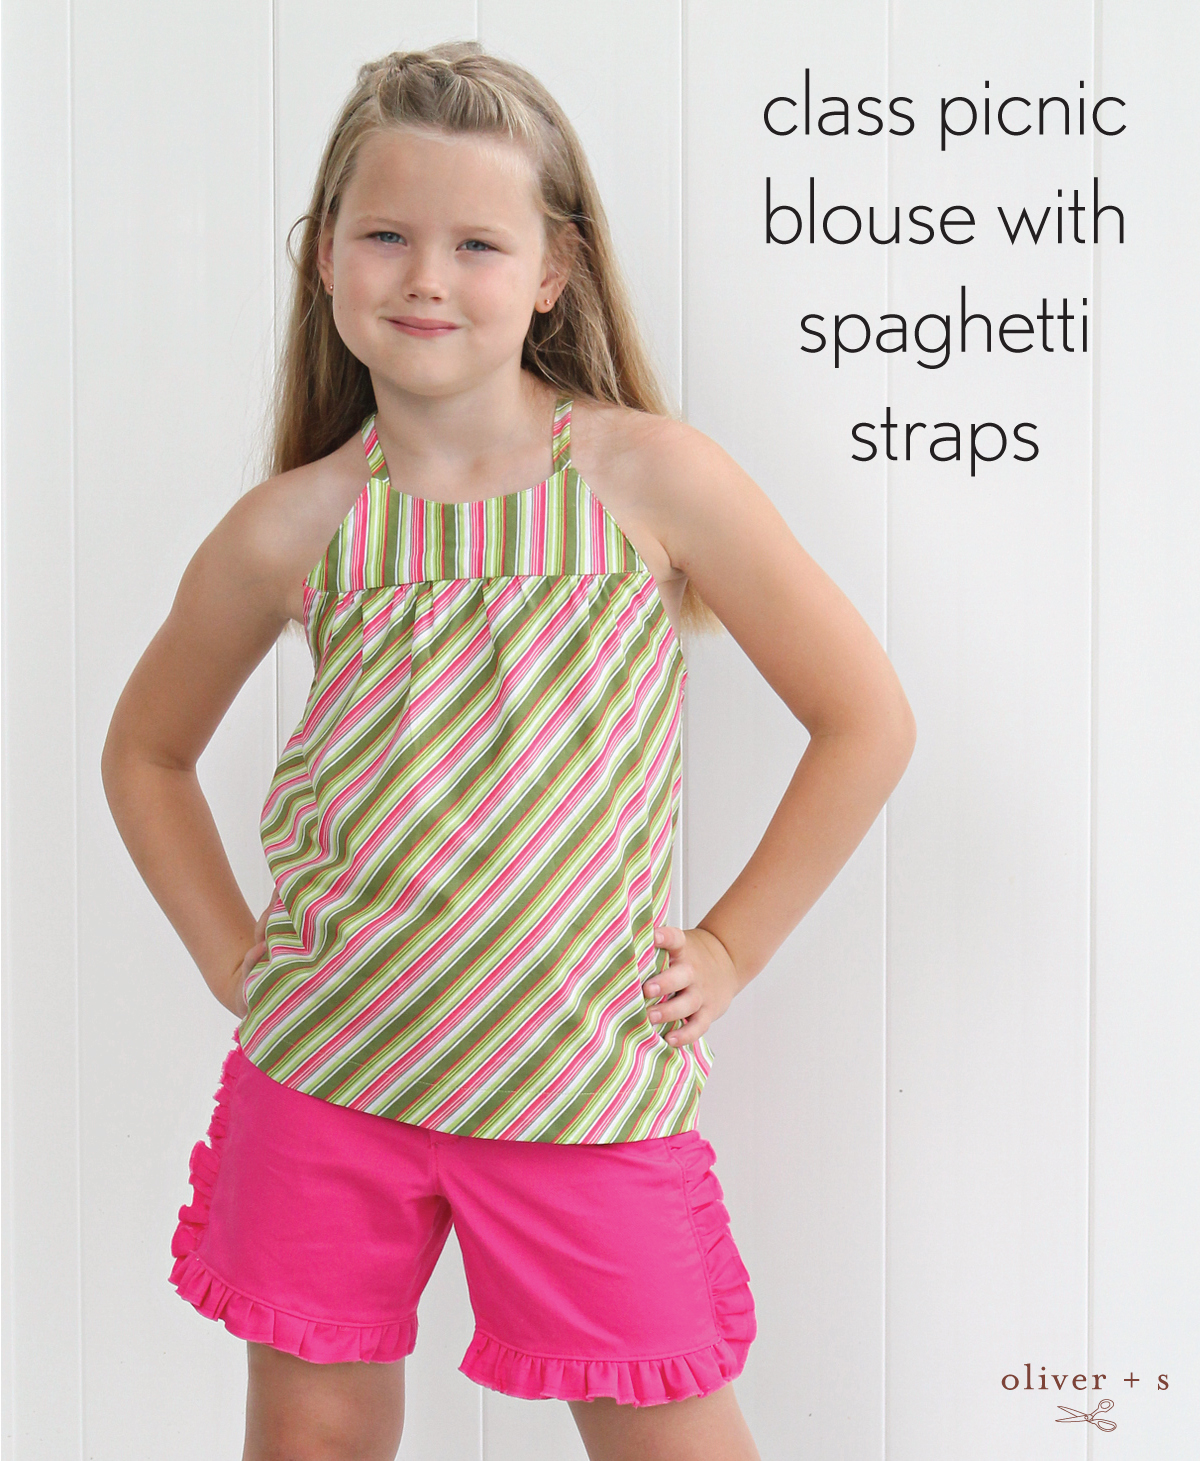 Spaghetti Strap Top Pattern - Our First Summer Project